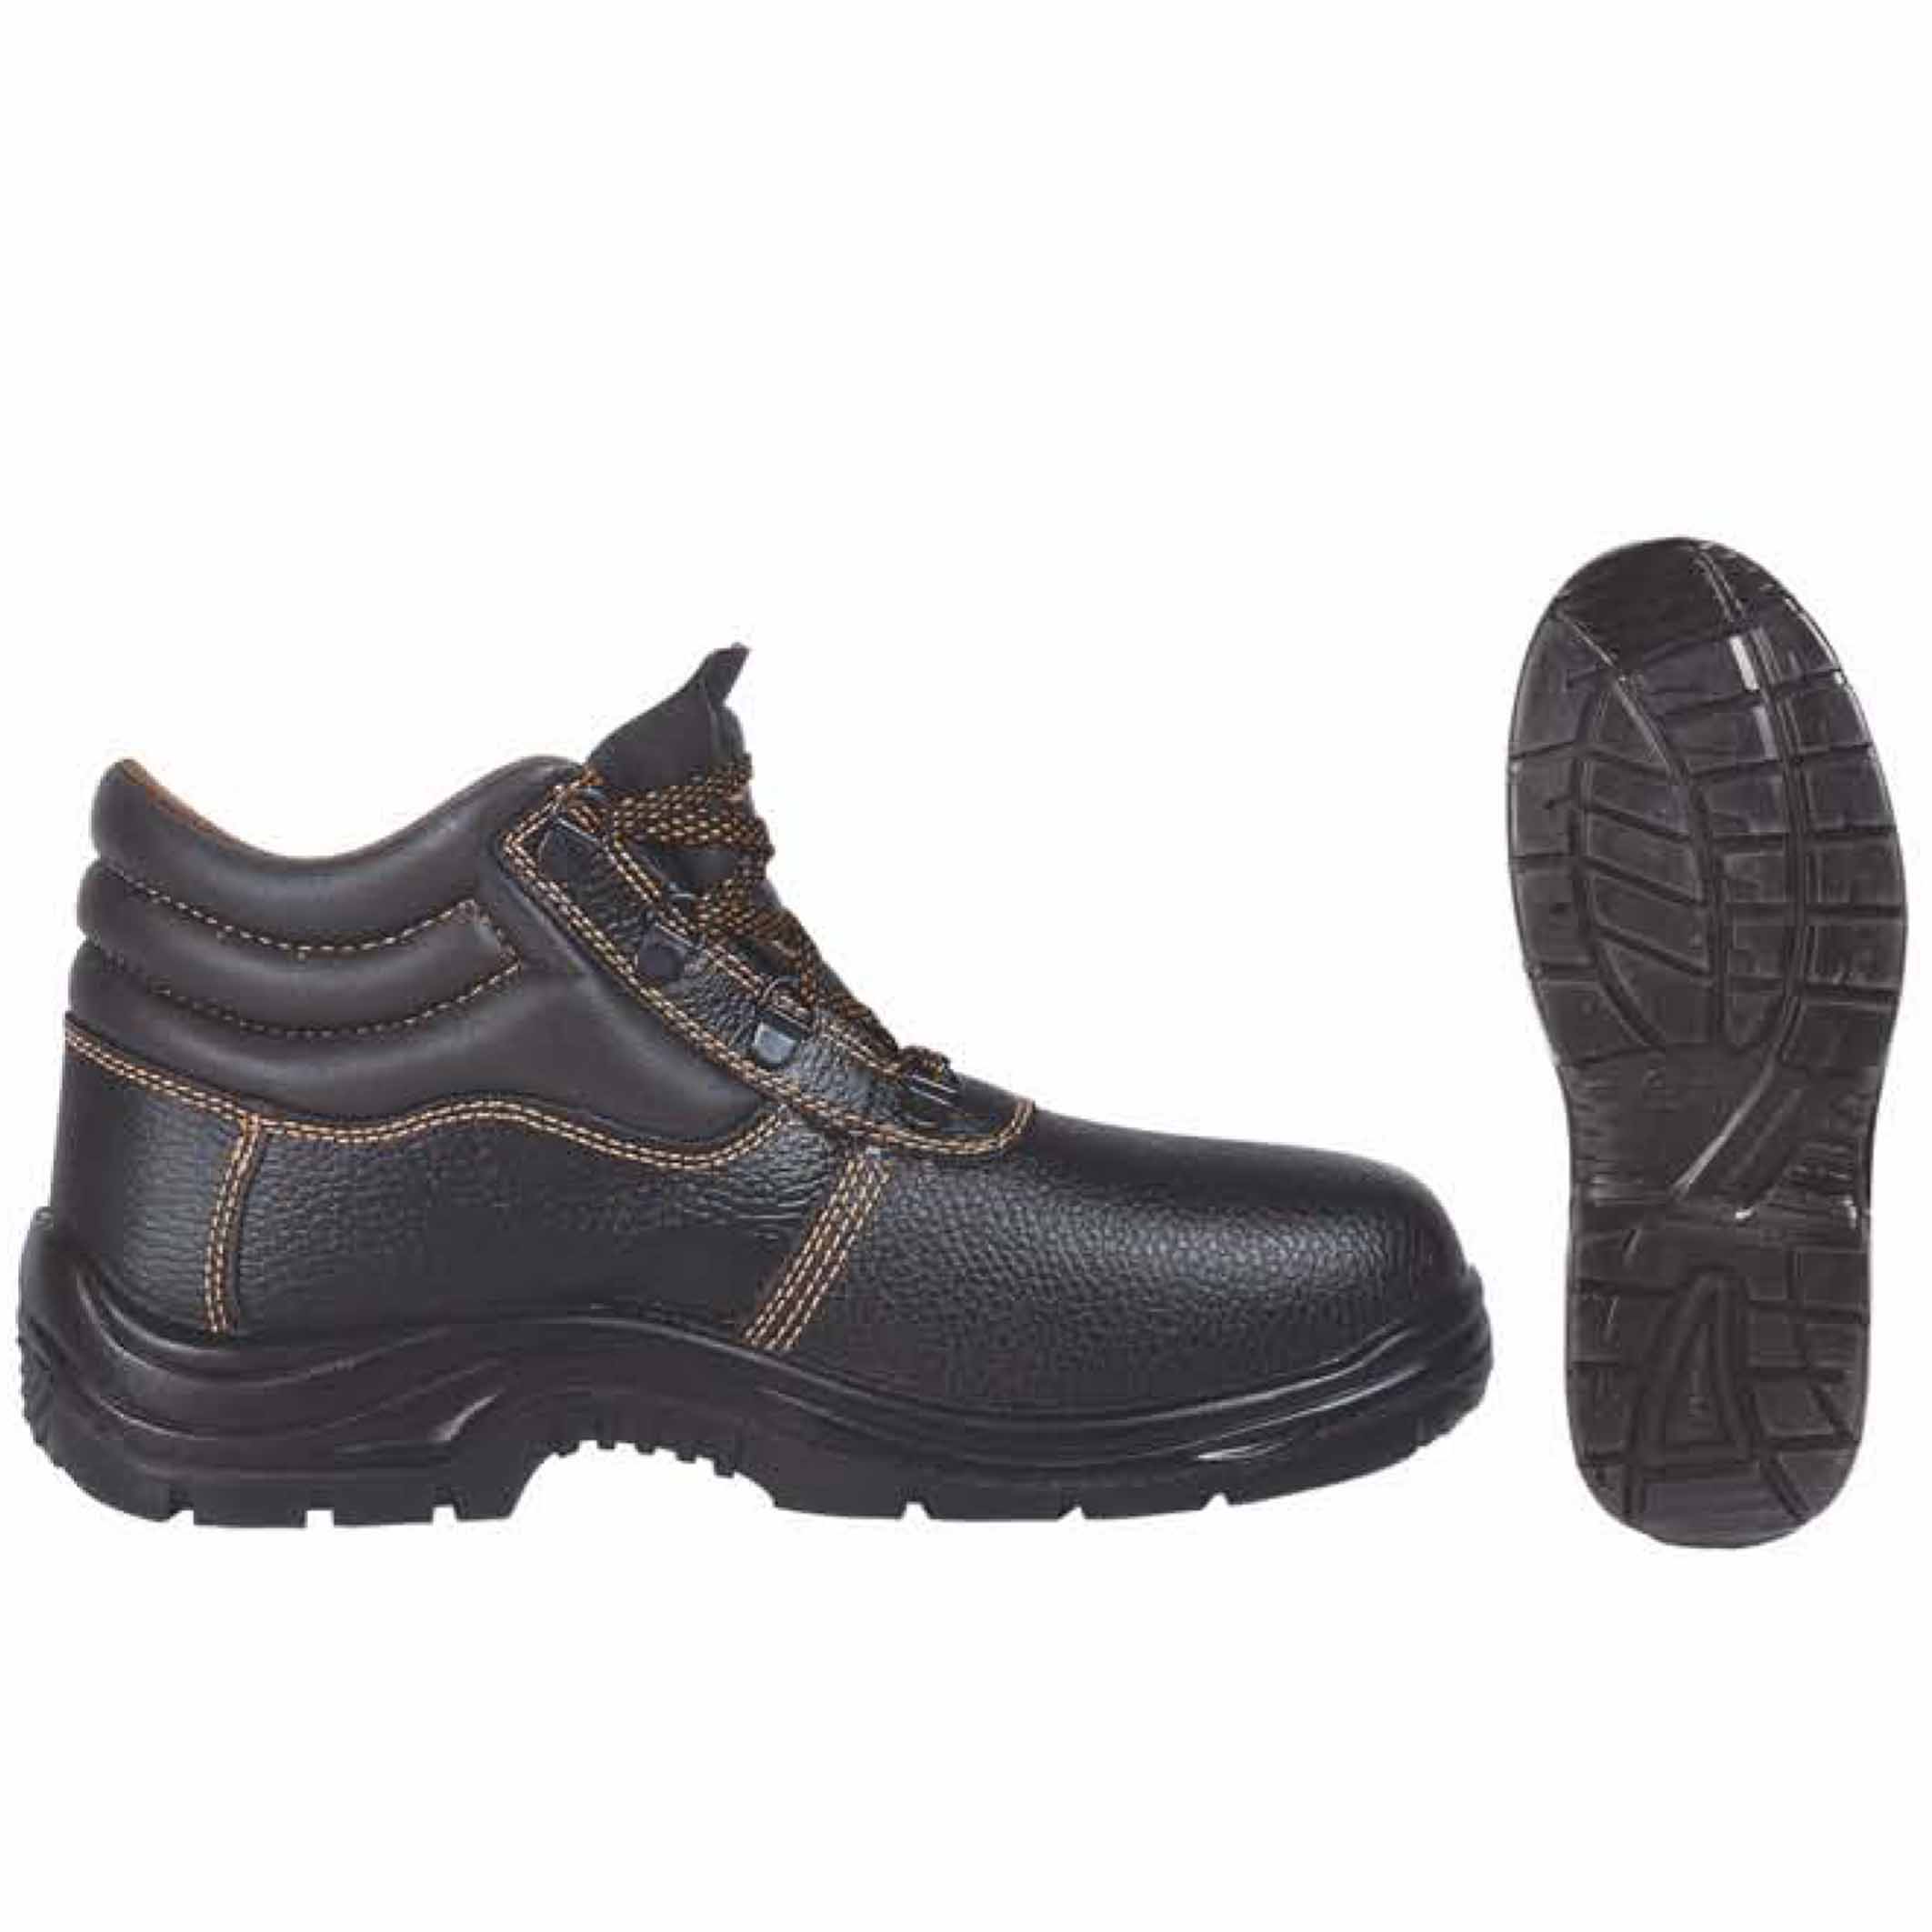 Code: O21 – Leather Safety shoes SO